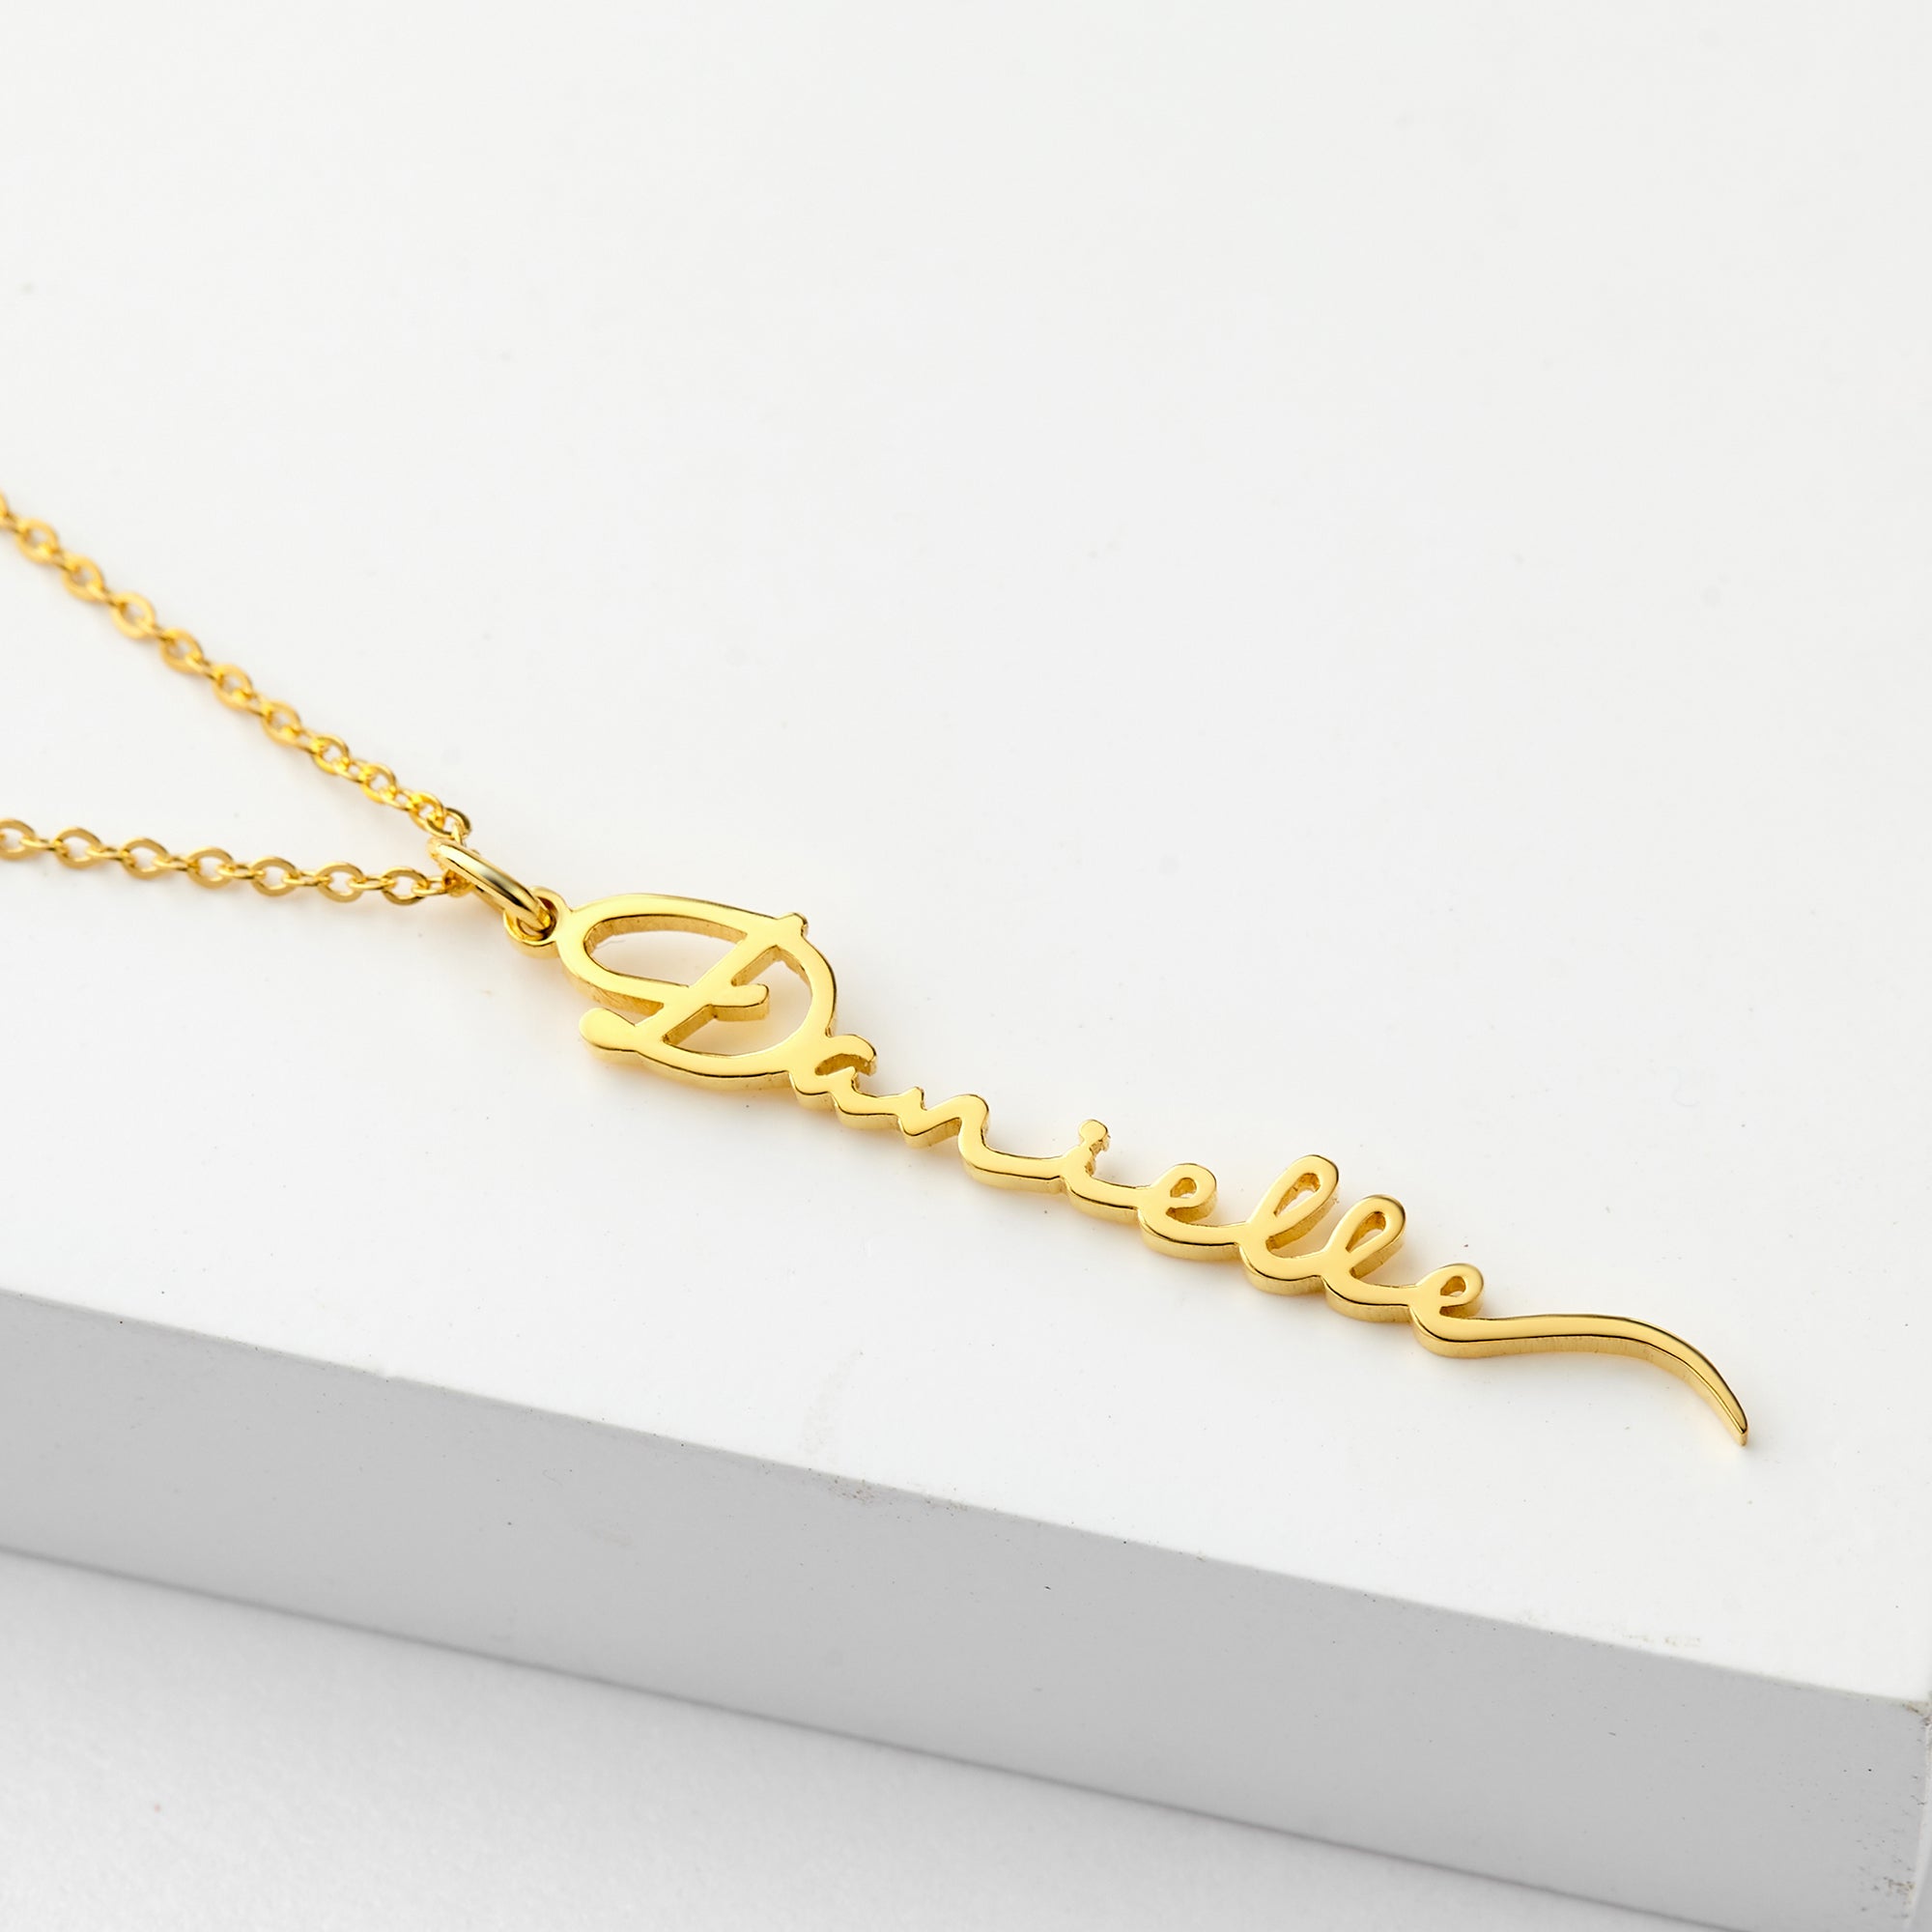 Personalized Name Necklace - Handwriting Font, Sterling Silver, Gold Plated - Gifts for Teen Girls, Daughters, Nieces - Necklaces - Bijou Her -  -  - 